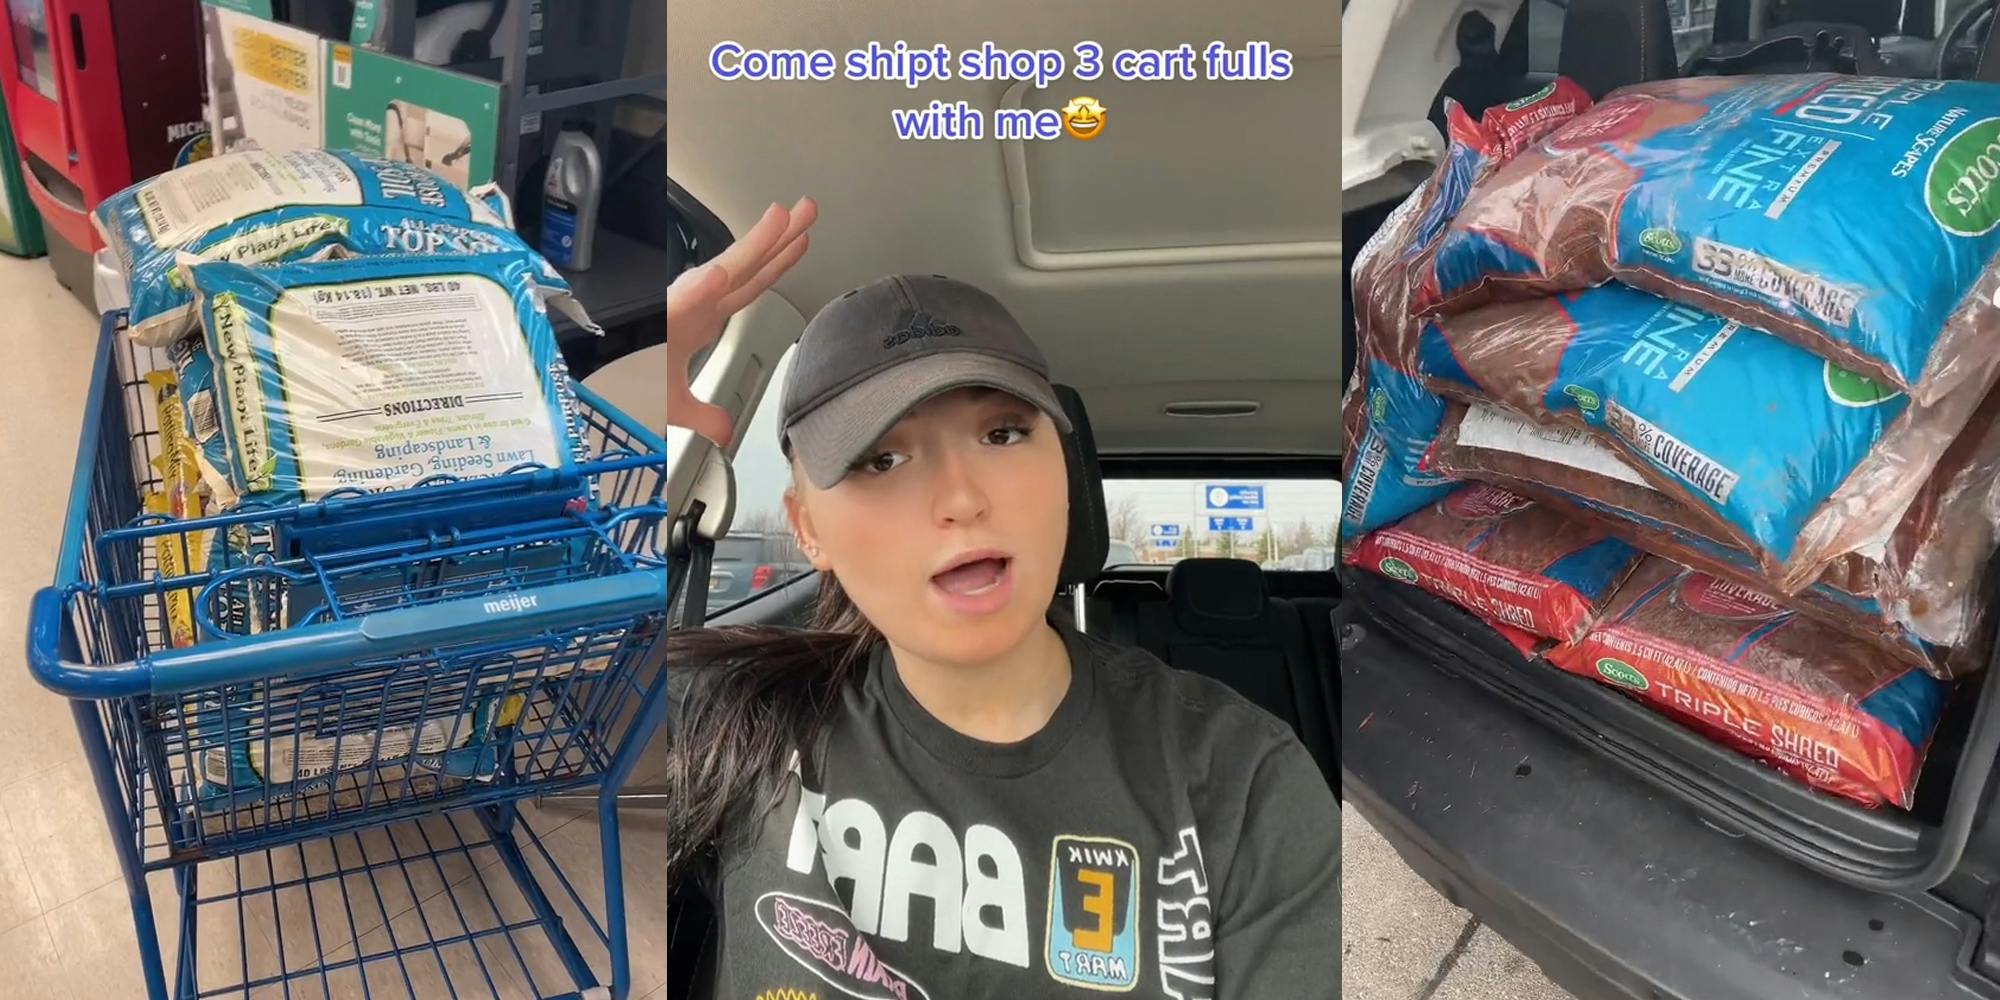 cart full of top soil bags (l) person speaking in car with caption "Come shipt shop 3 carts full with me" (c) bags of mulch stacked in car trunk (r)